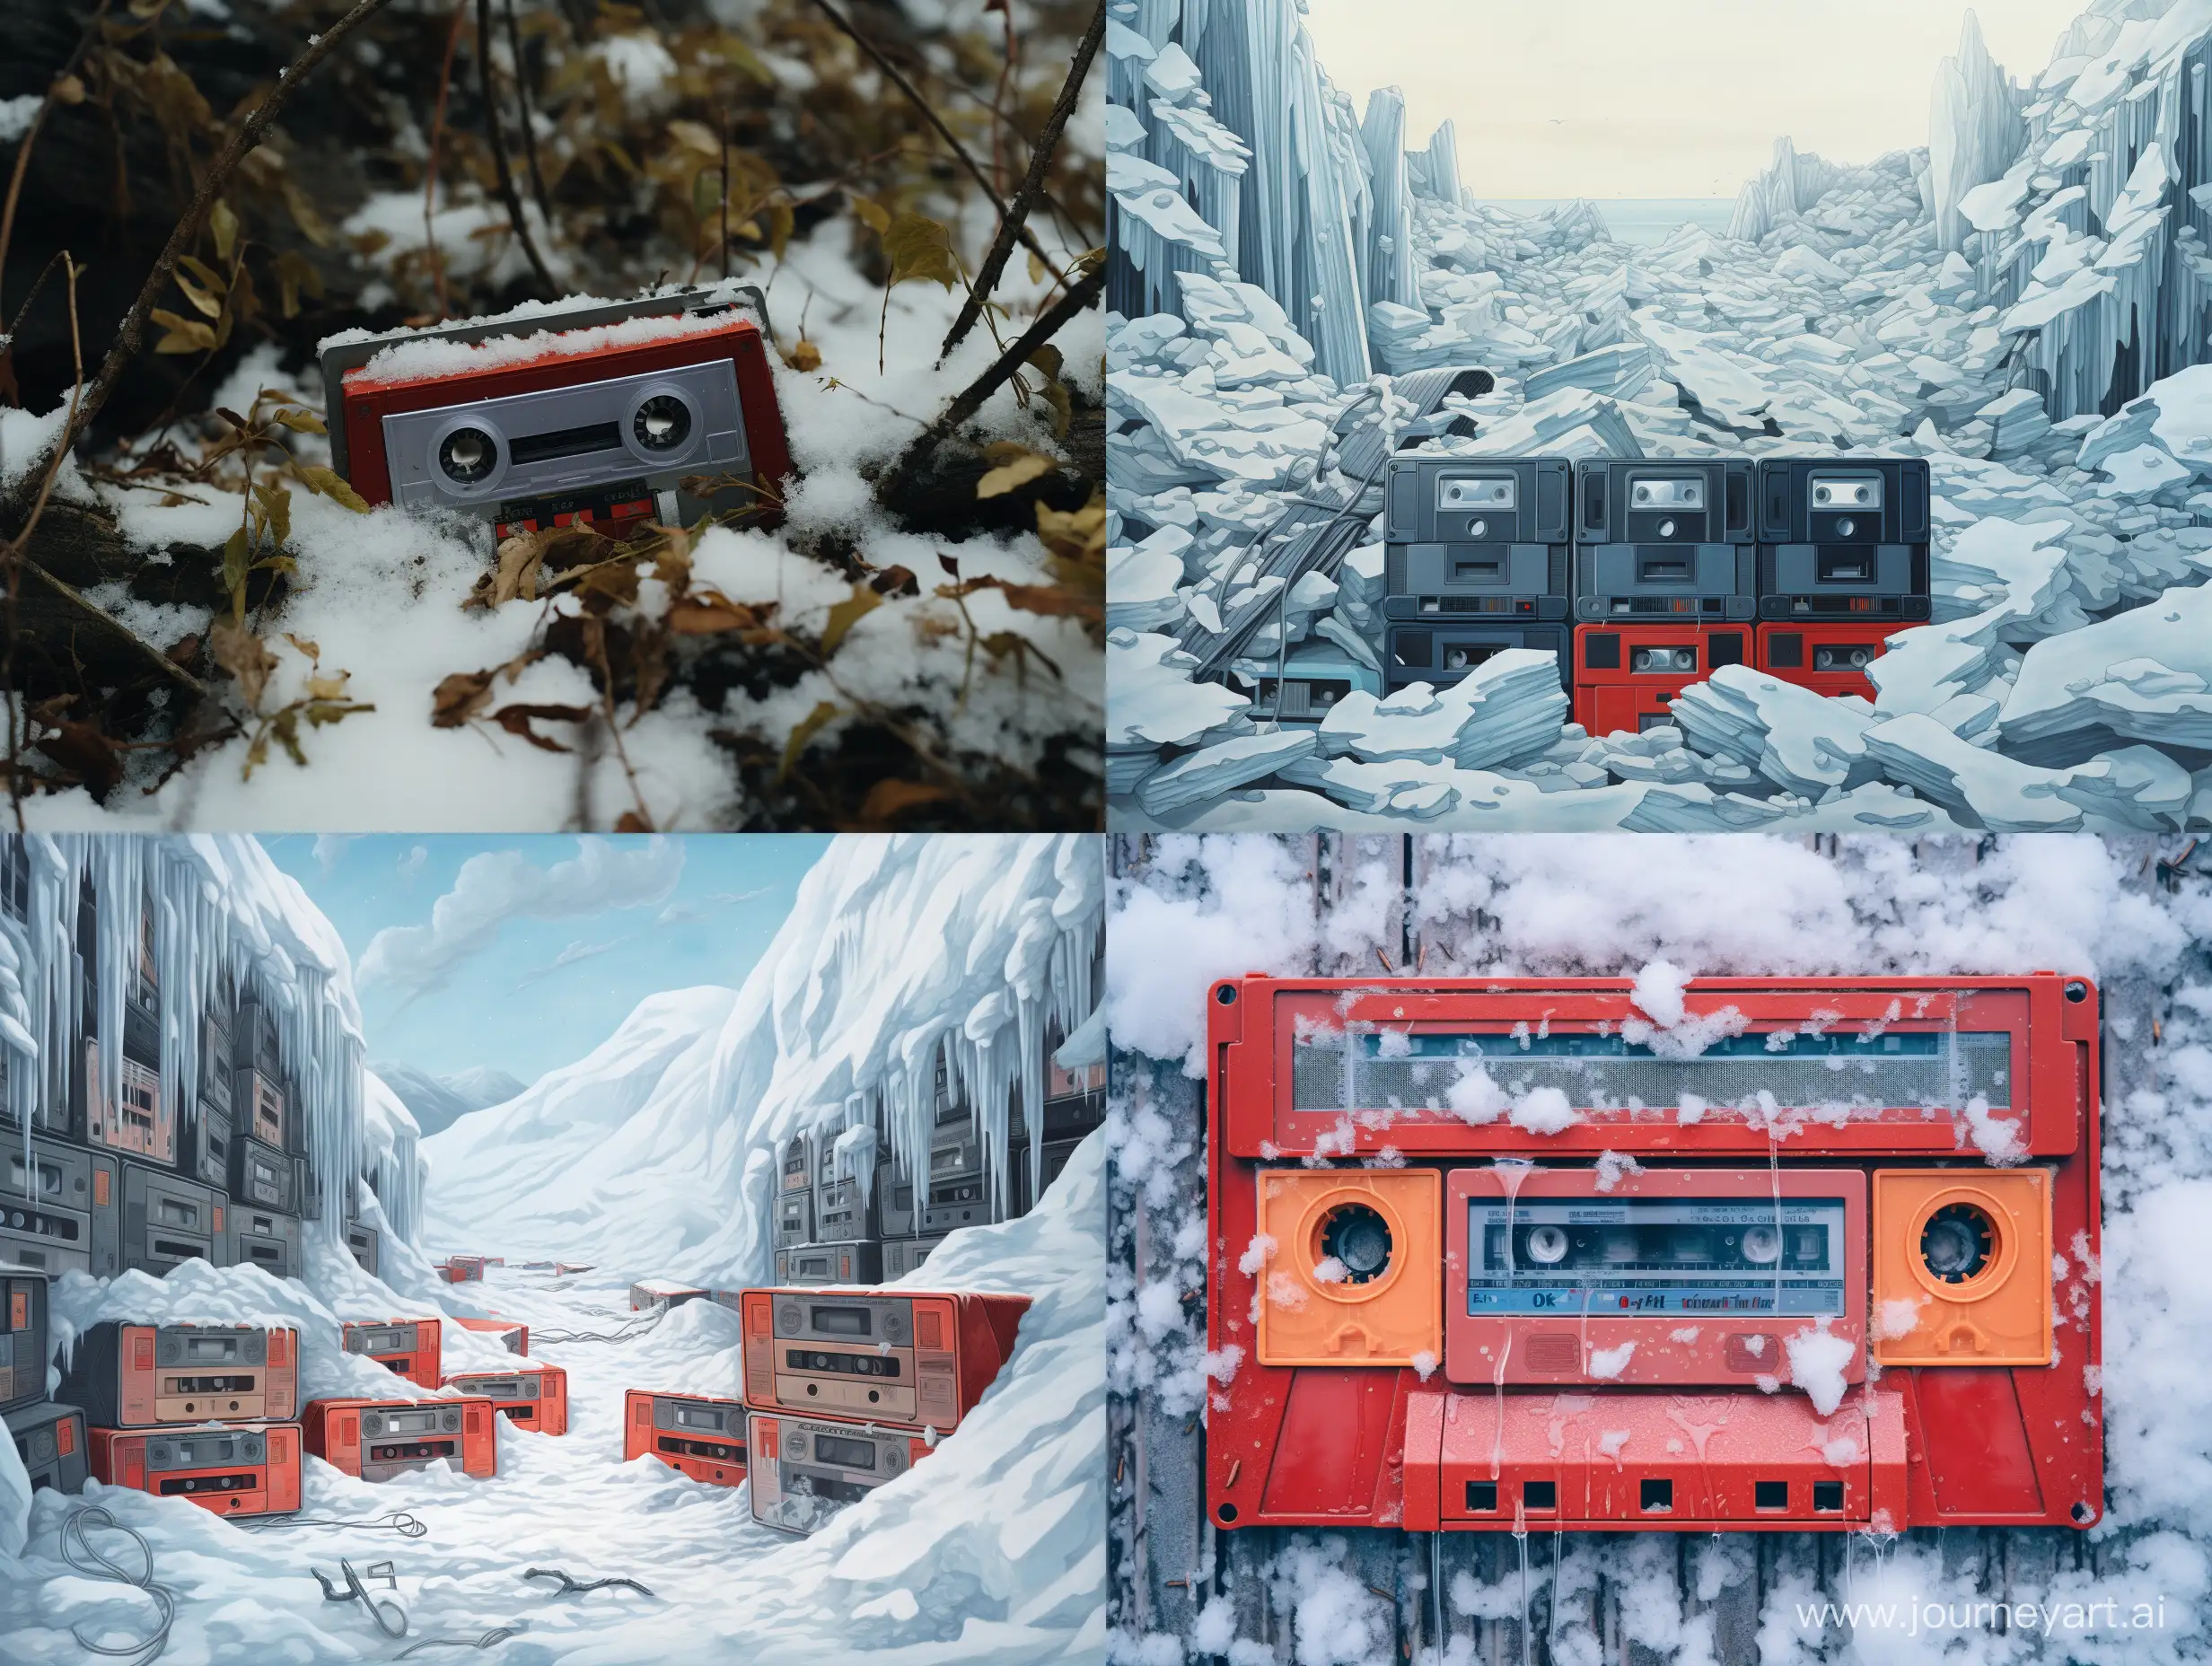 The cassettes are covered with snow a lot